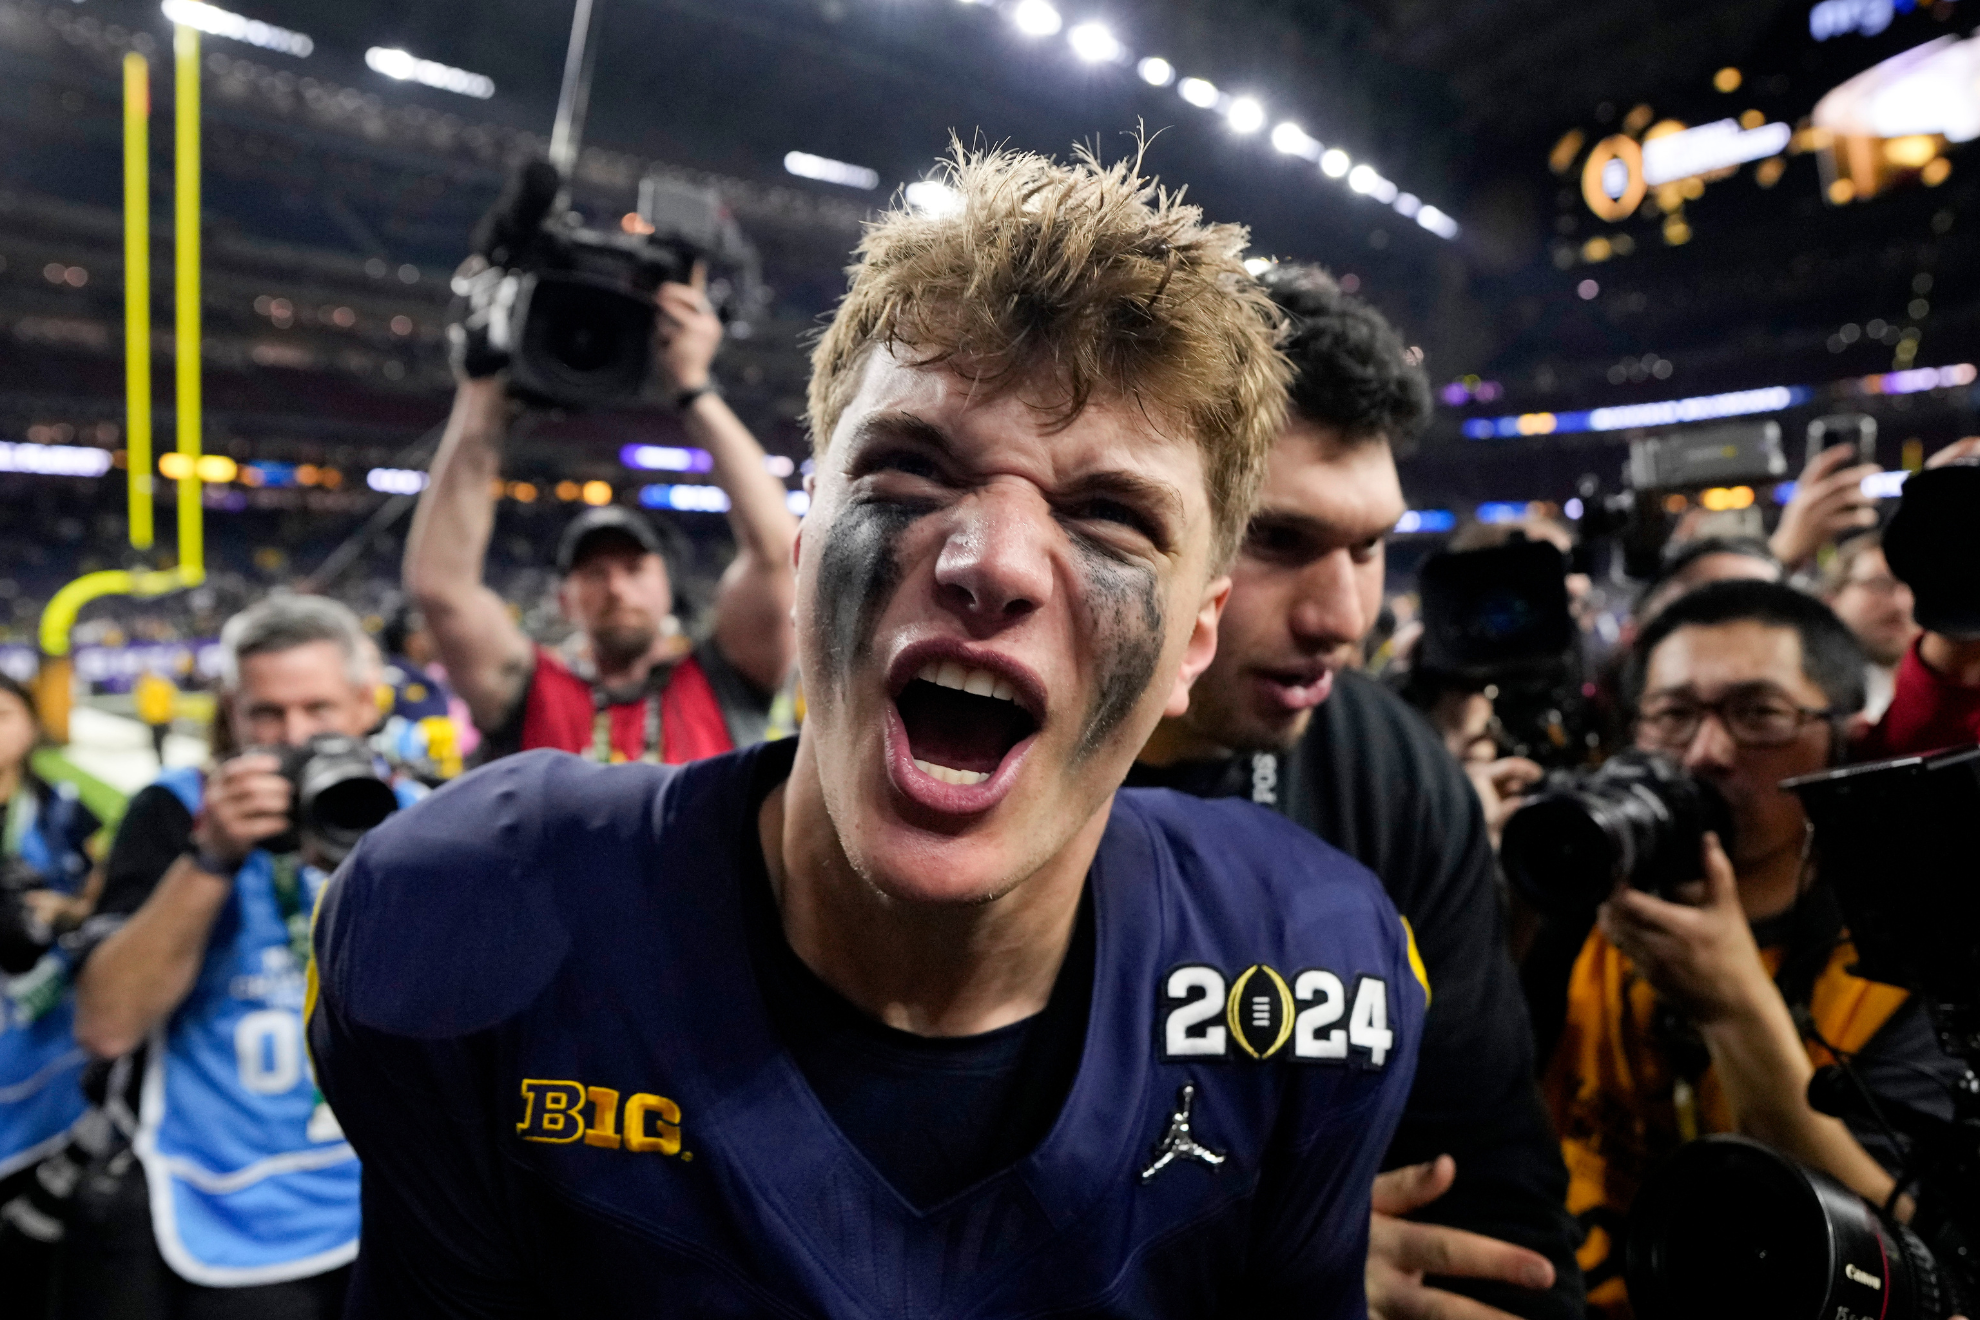 J.J. McCarthy led Michigan to its first national title since 1997.